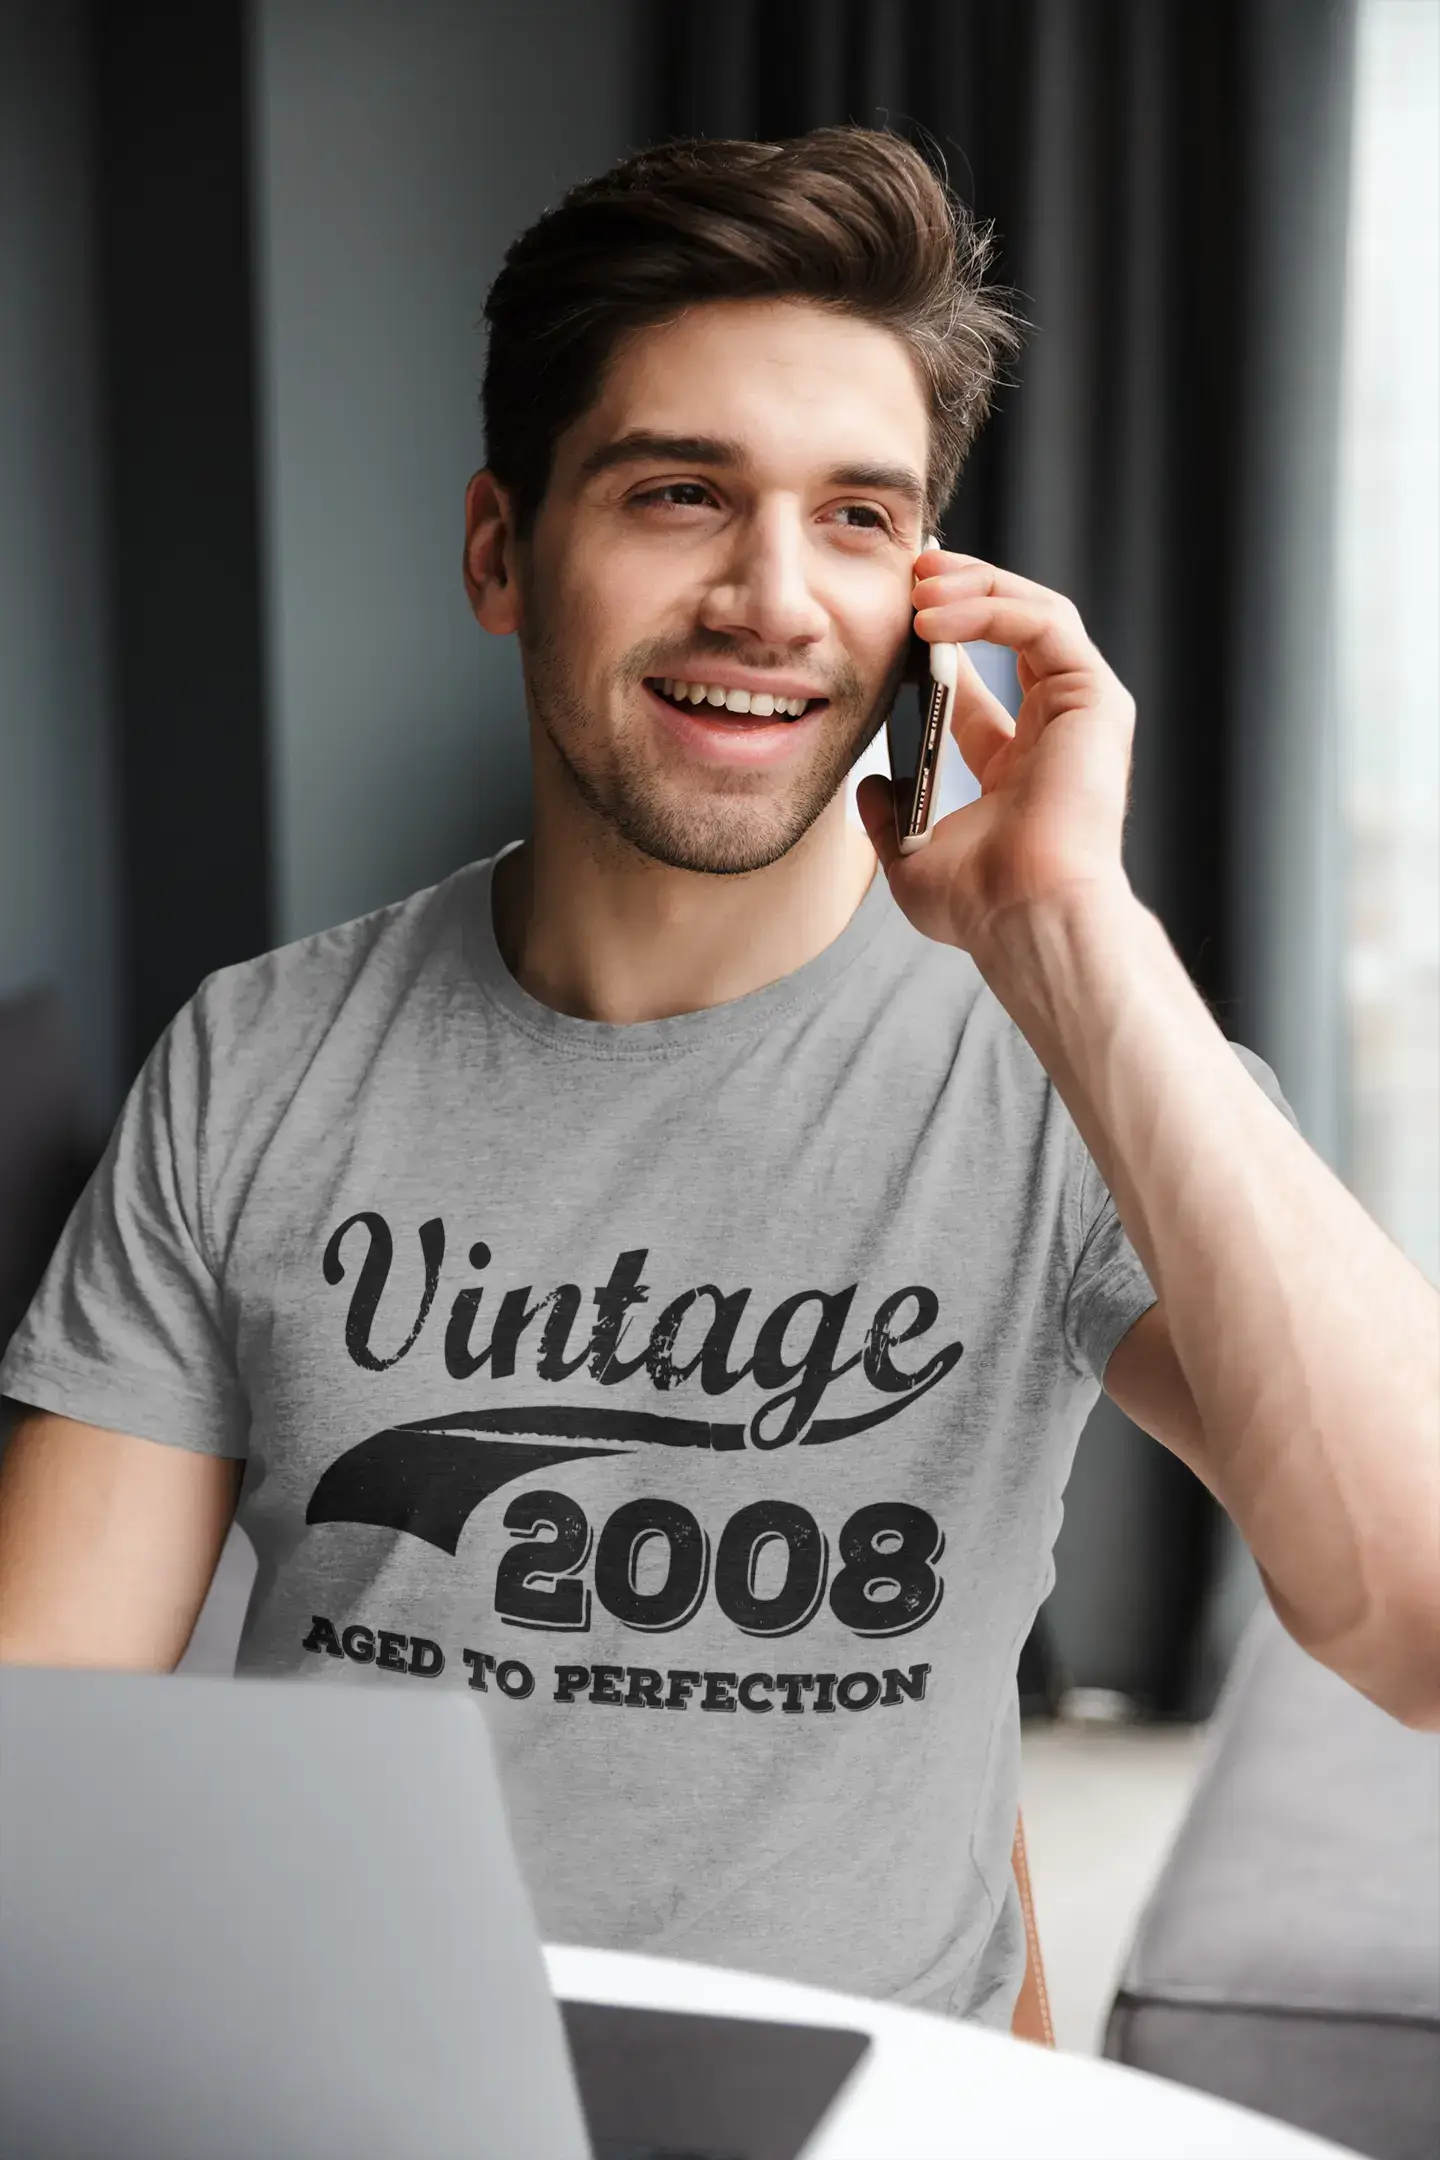 Vintage Aged to Perfection 2008, Grey, Men's Short Sleeve Round Neck T-shirt, gift t-shirt 00346